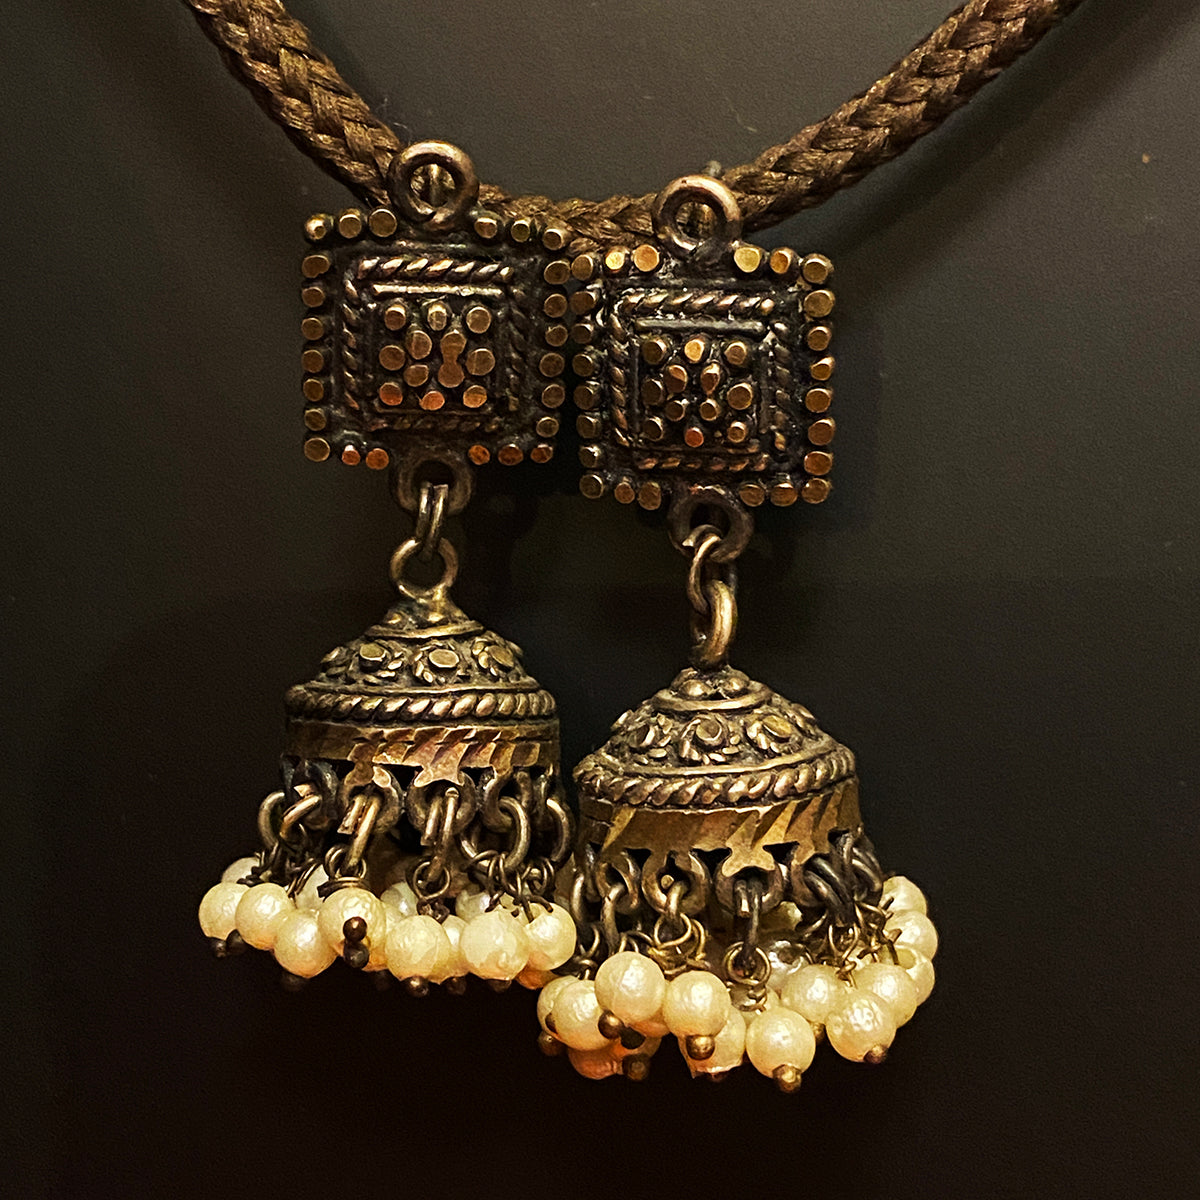 Oxidized Silver Jhumka Indian Earrings with pearls - Vintage India NYC